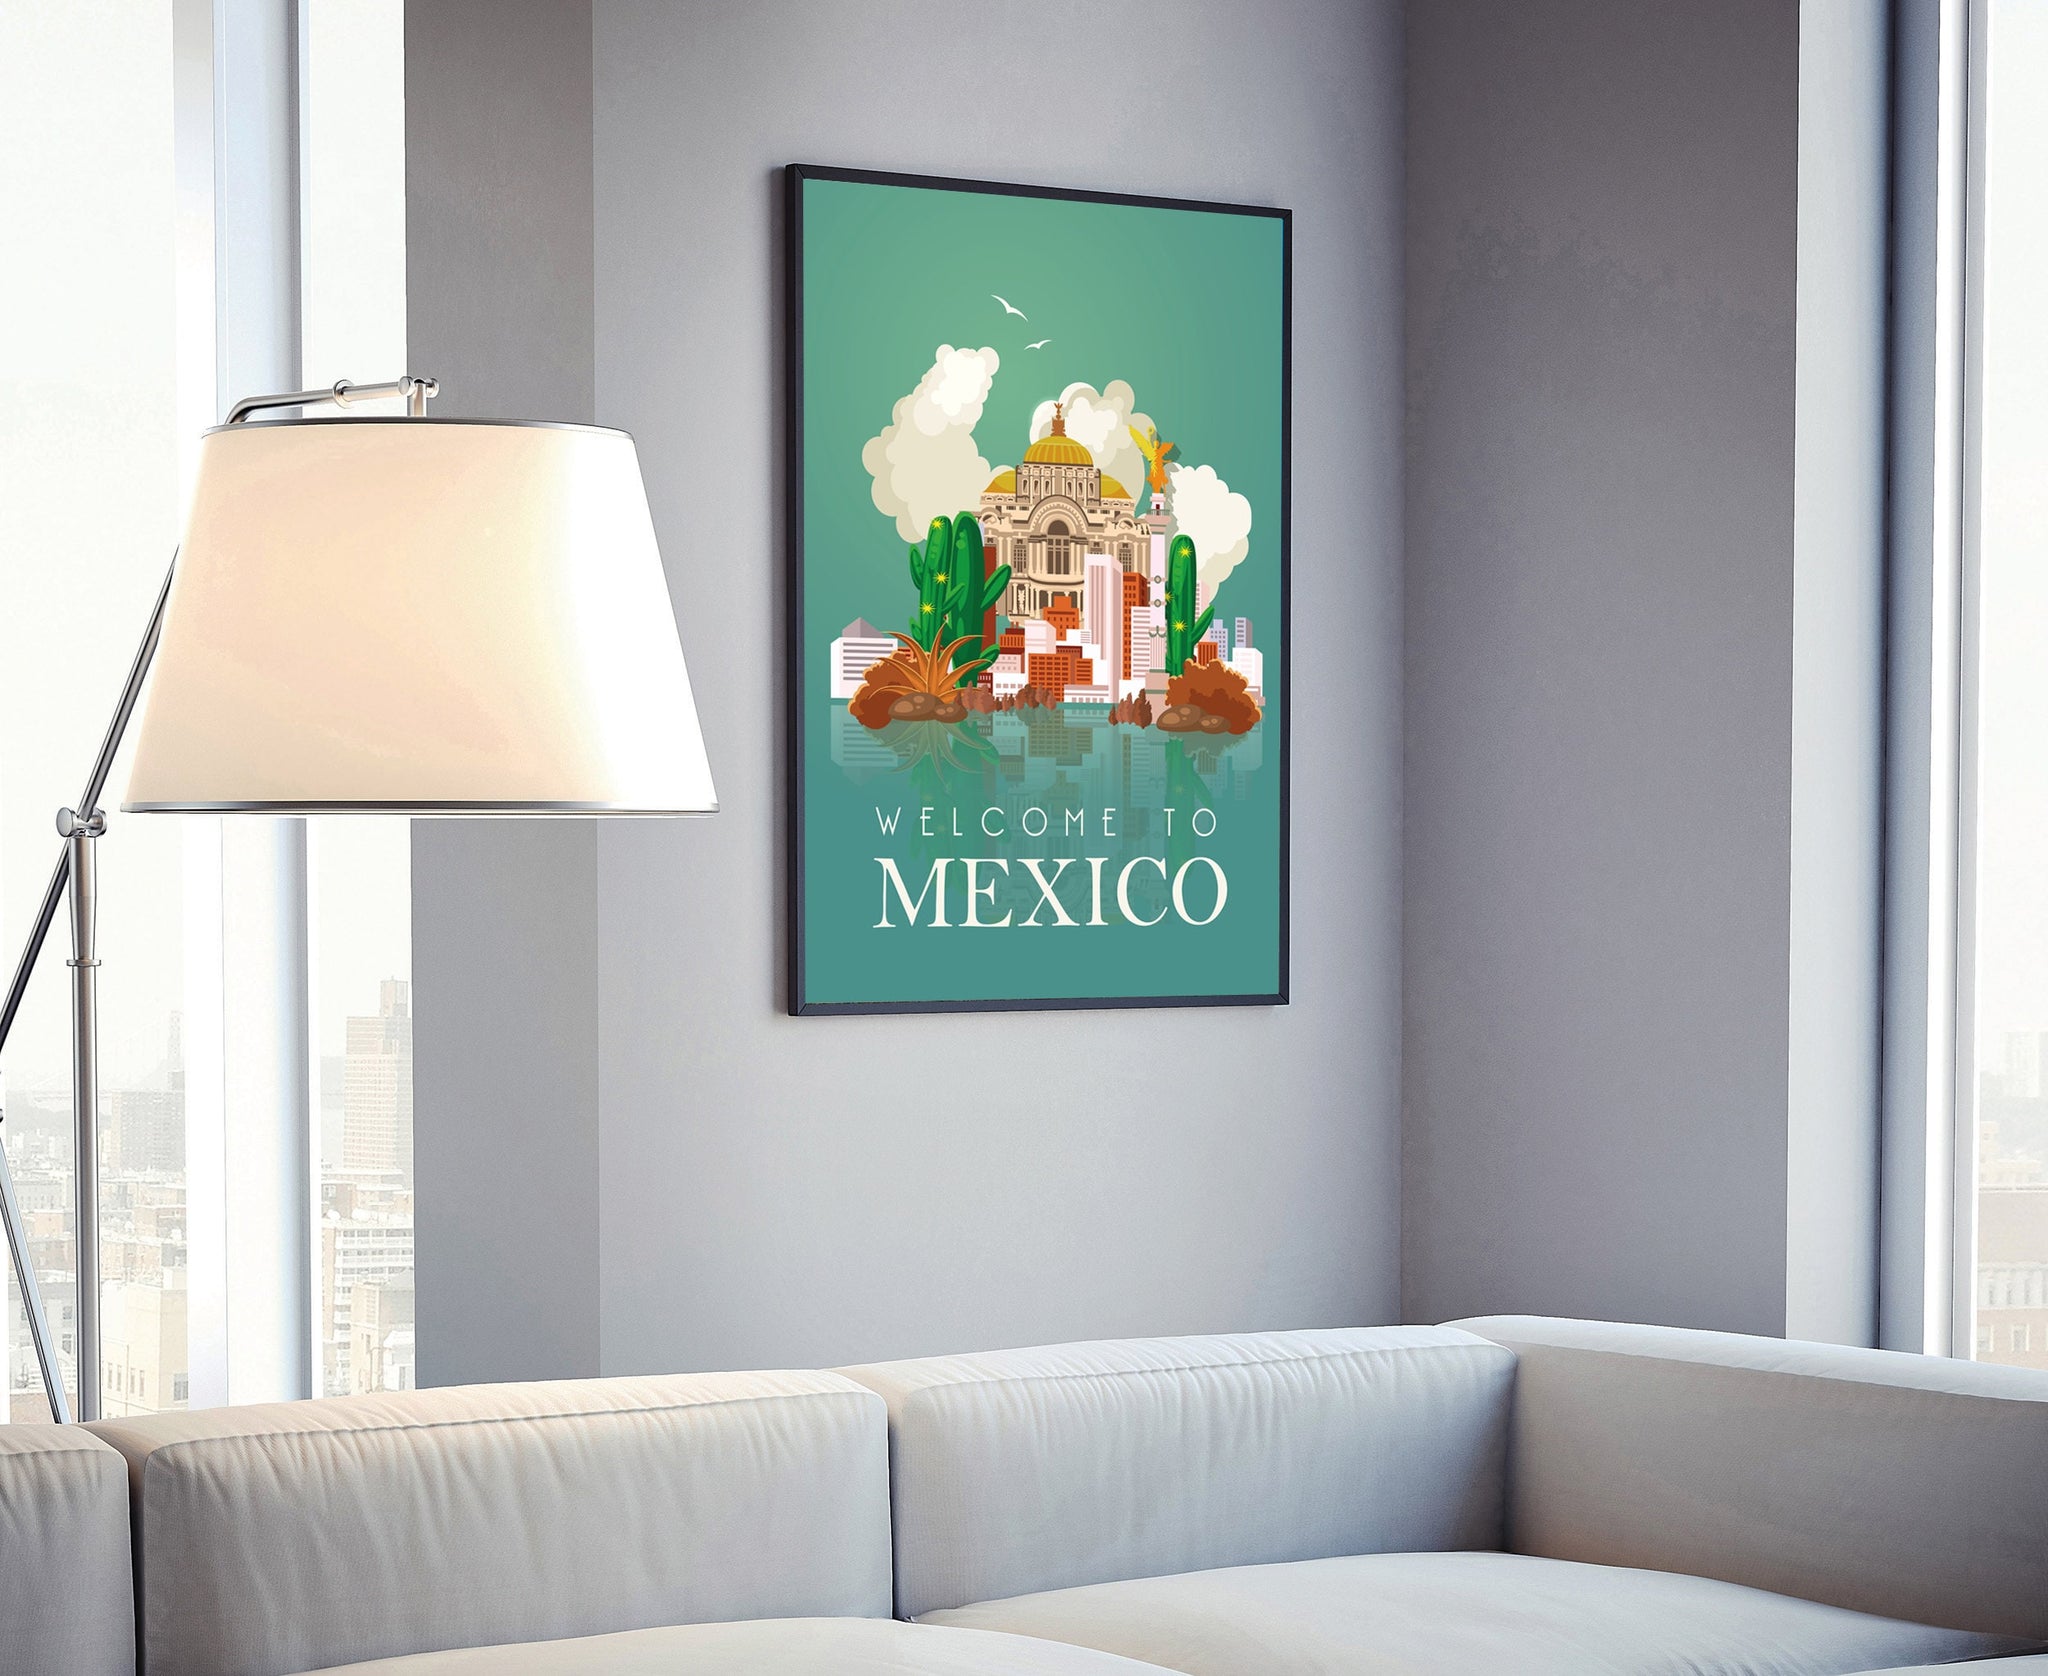 Mexico Vintage Rustic Poster Print, Retro Style Travel Poster Print